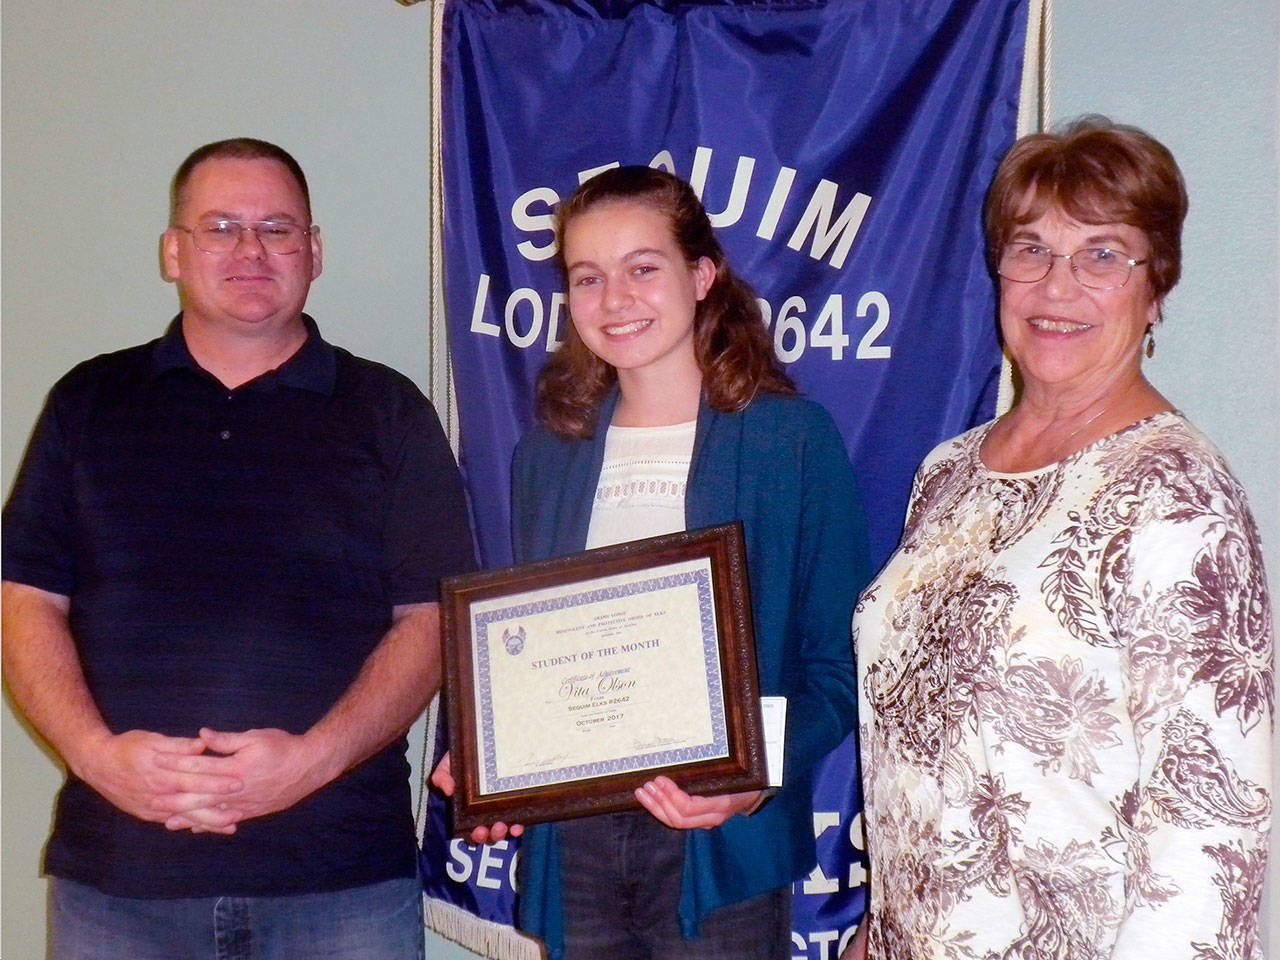 Milestone: Elks honor Olson as Student of the Month